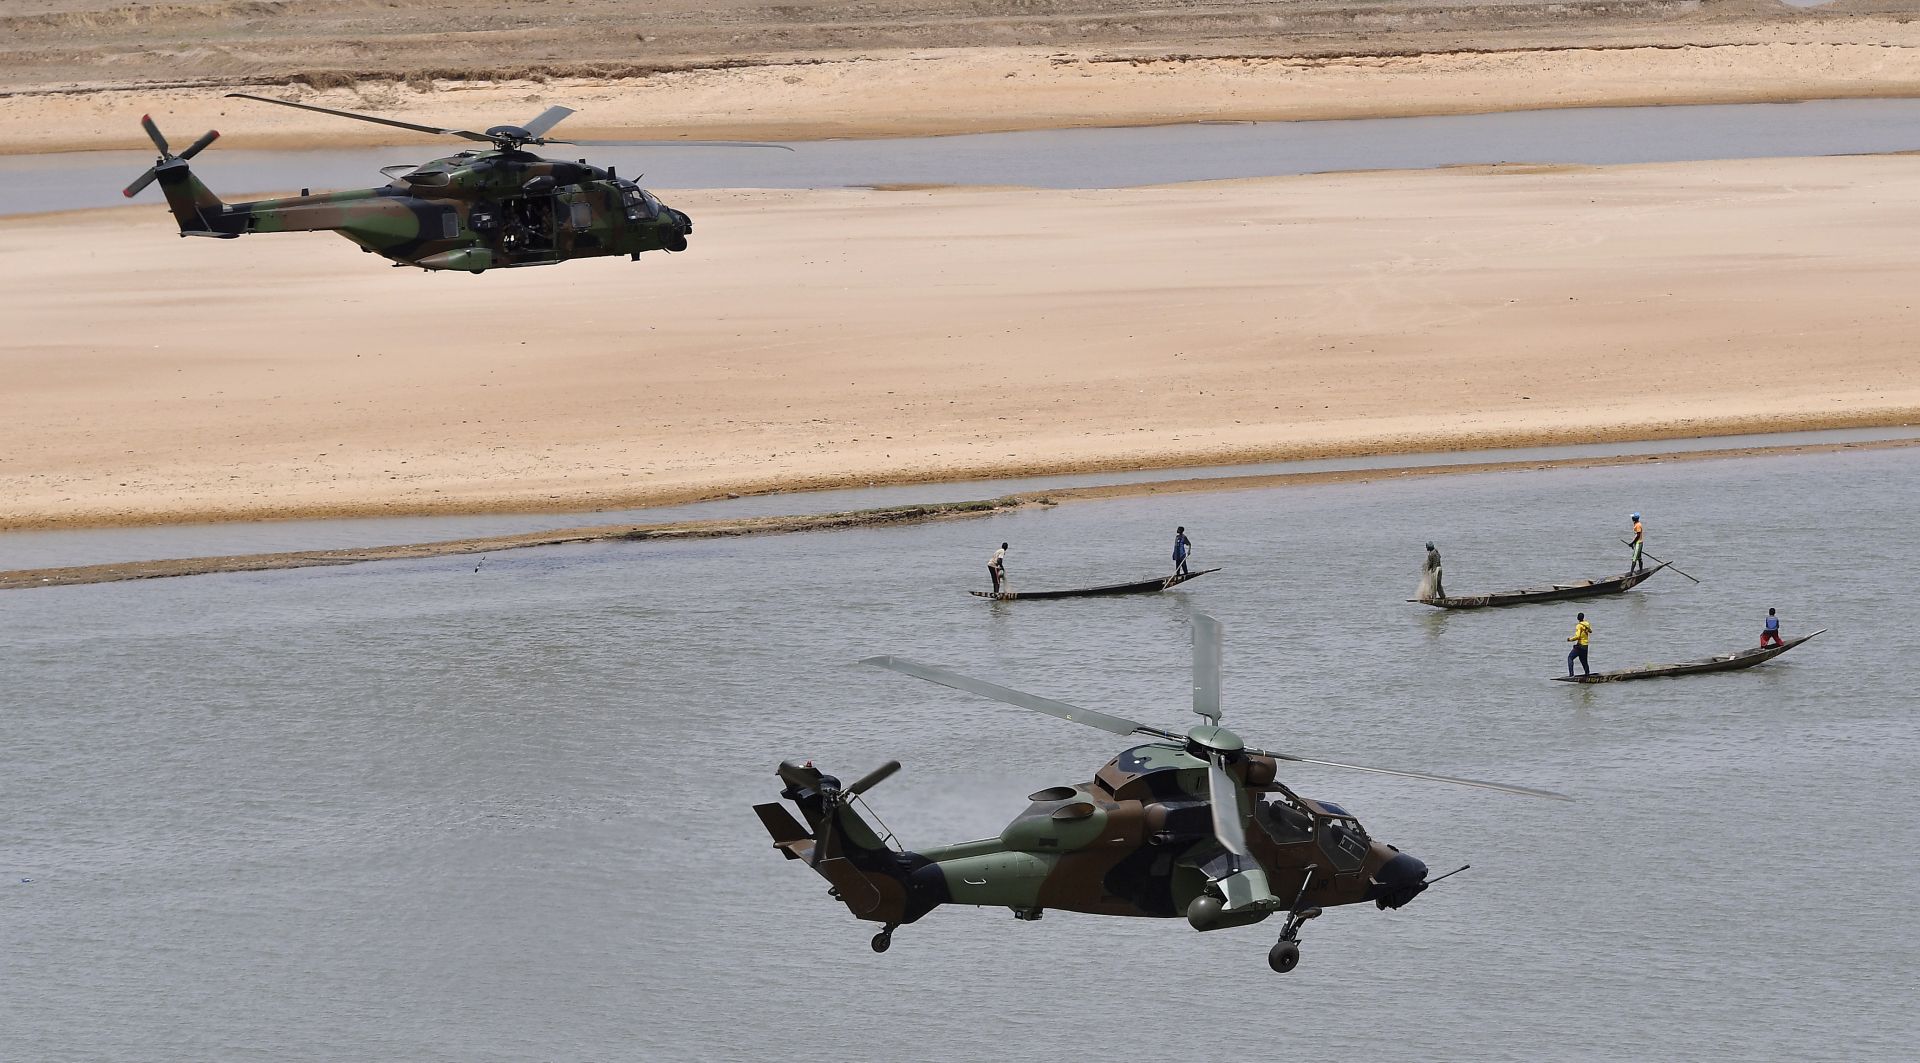 epa08025956 (FILE) - A military helicopter  carrying French President Emmanuel Macron (upper-L)  flies over Gao during a visit to France's Barkhane counter-terrorism operation in Africa's Sahel region, northern Mali, 19 May 2017 (reissued 26 November 2019). According to recent reports, 13 French soldiers died in helicopter crash during the Barkhane counter-terrorism operation against jihadists in Mali.  EPA/CHRISTOPHE PETIT TESSON / POOL